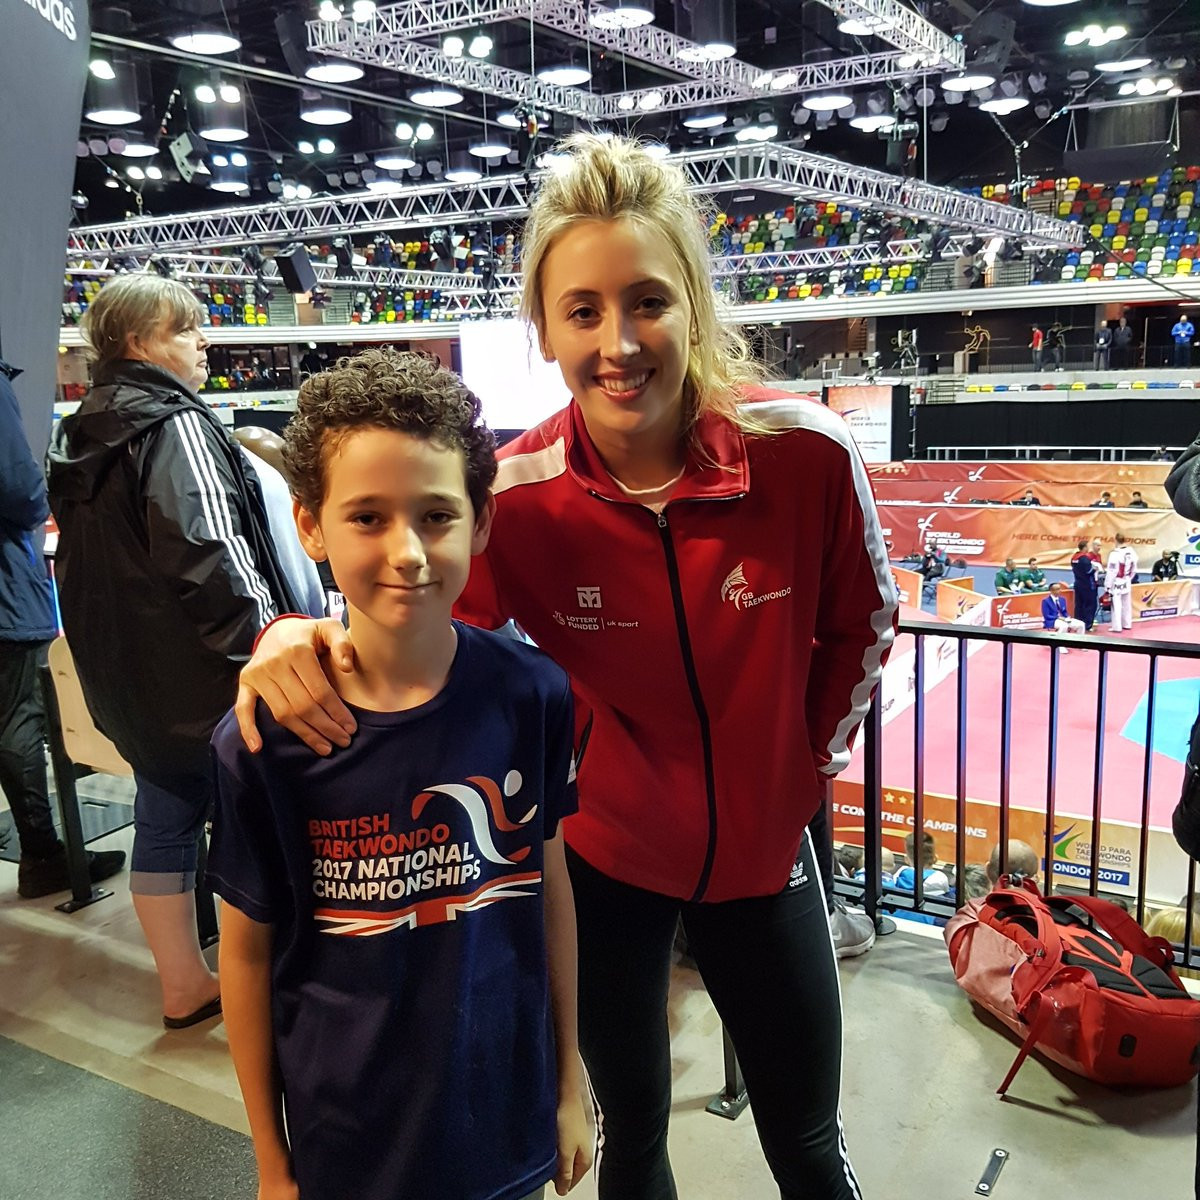 Double Olympic champion Jade Jones, pictured here with a young fan, helped hosts Great Britain top the overall medal table thanks to her gold medal-winning performance in the women's under 57kg category yesterday ©Karen Williams/Twitter